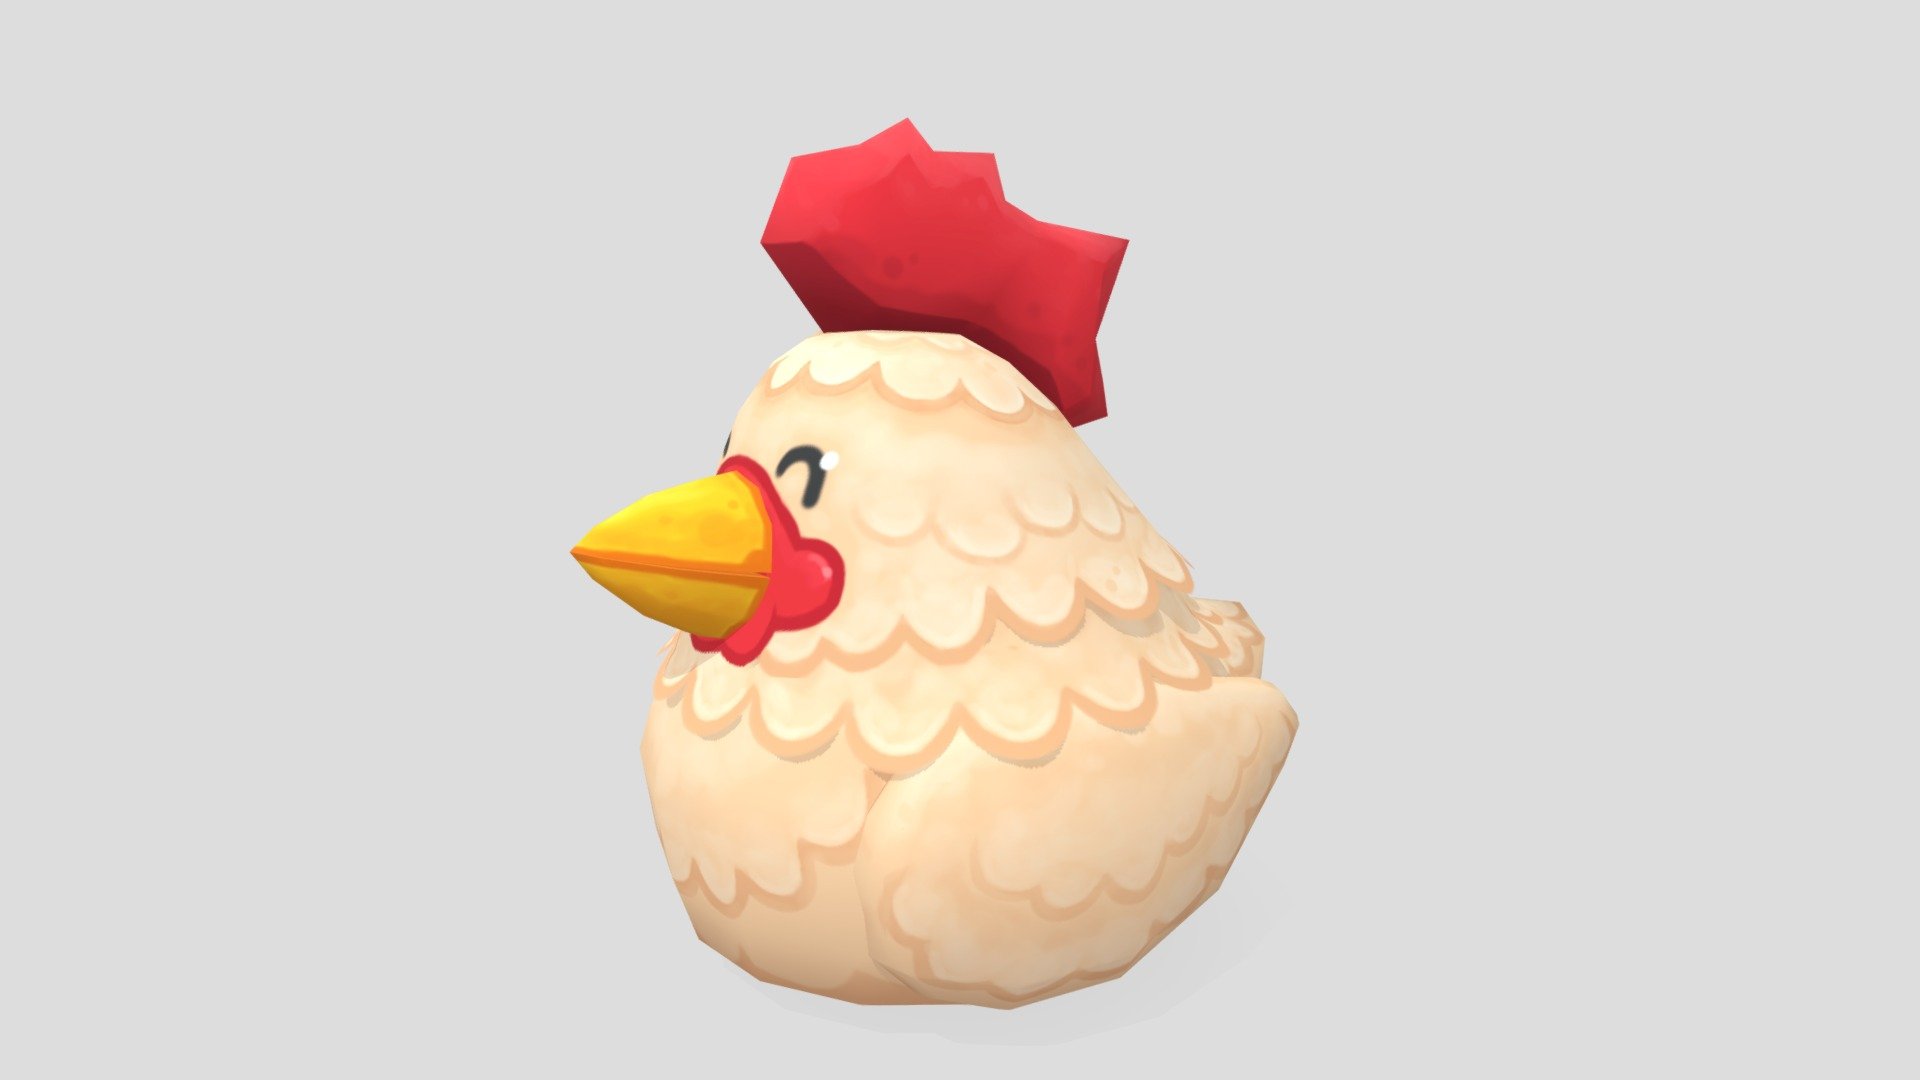 I just started working on some new animals for our game Farm Folks. Never having made an animal before, I started with something easy, so here's our new chicken!

Here's what they look like in game: https://twitter.com/thenameismitch/status/1225269008129130496

Feel free to come join us developers and our community on Discord!: discord.gg/QrCtDHN - Chicken - Farm Folks - 3D model by thenamesmitch 3d model